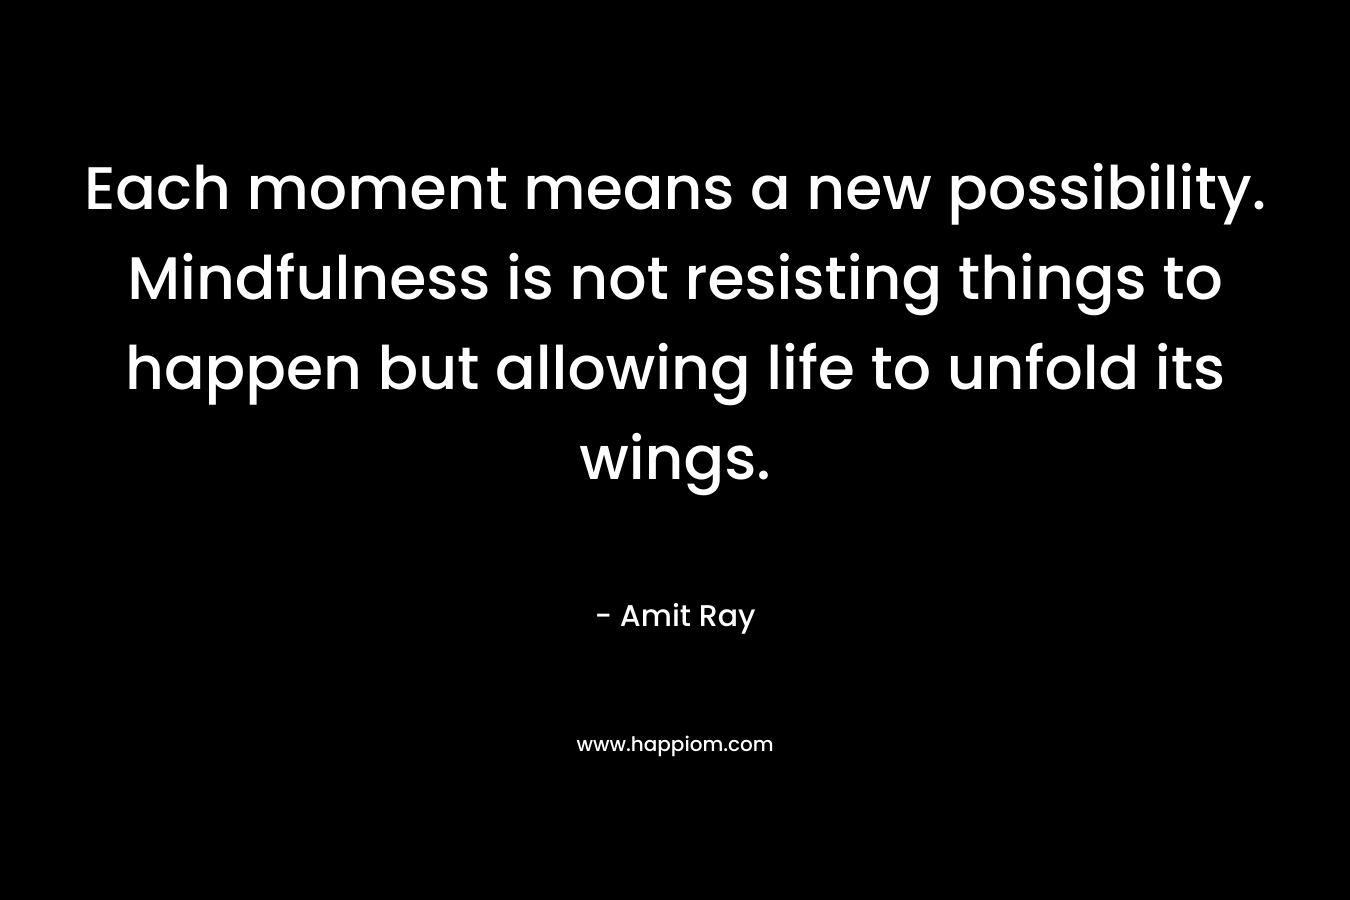 Each moment means a new possibility. Mindfulness is not resisting things to happen but allowing life to unfold its wings.